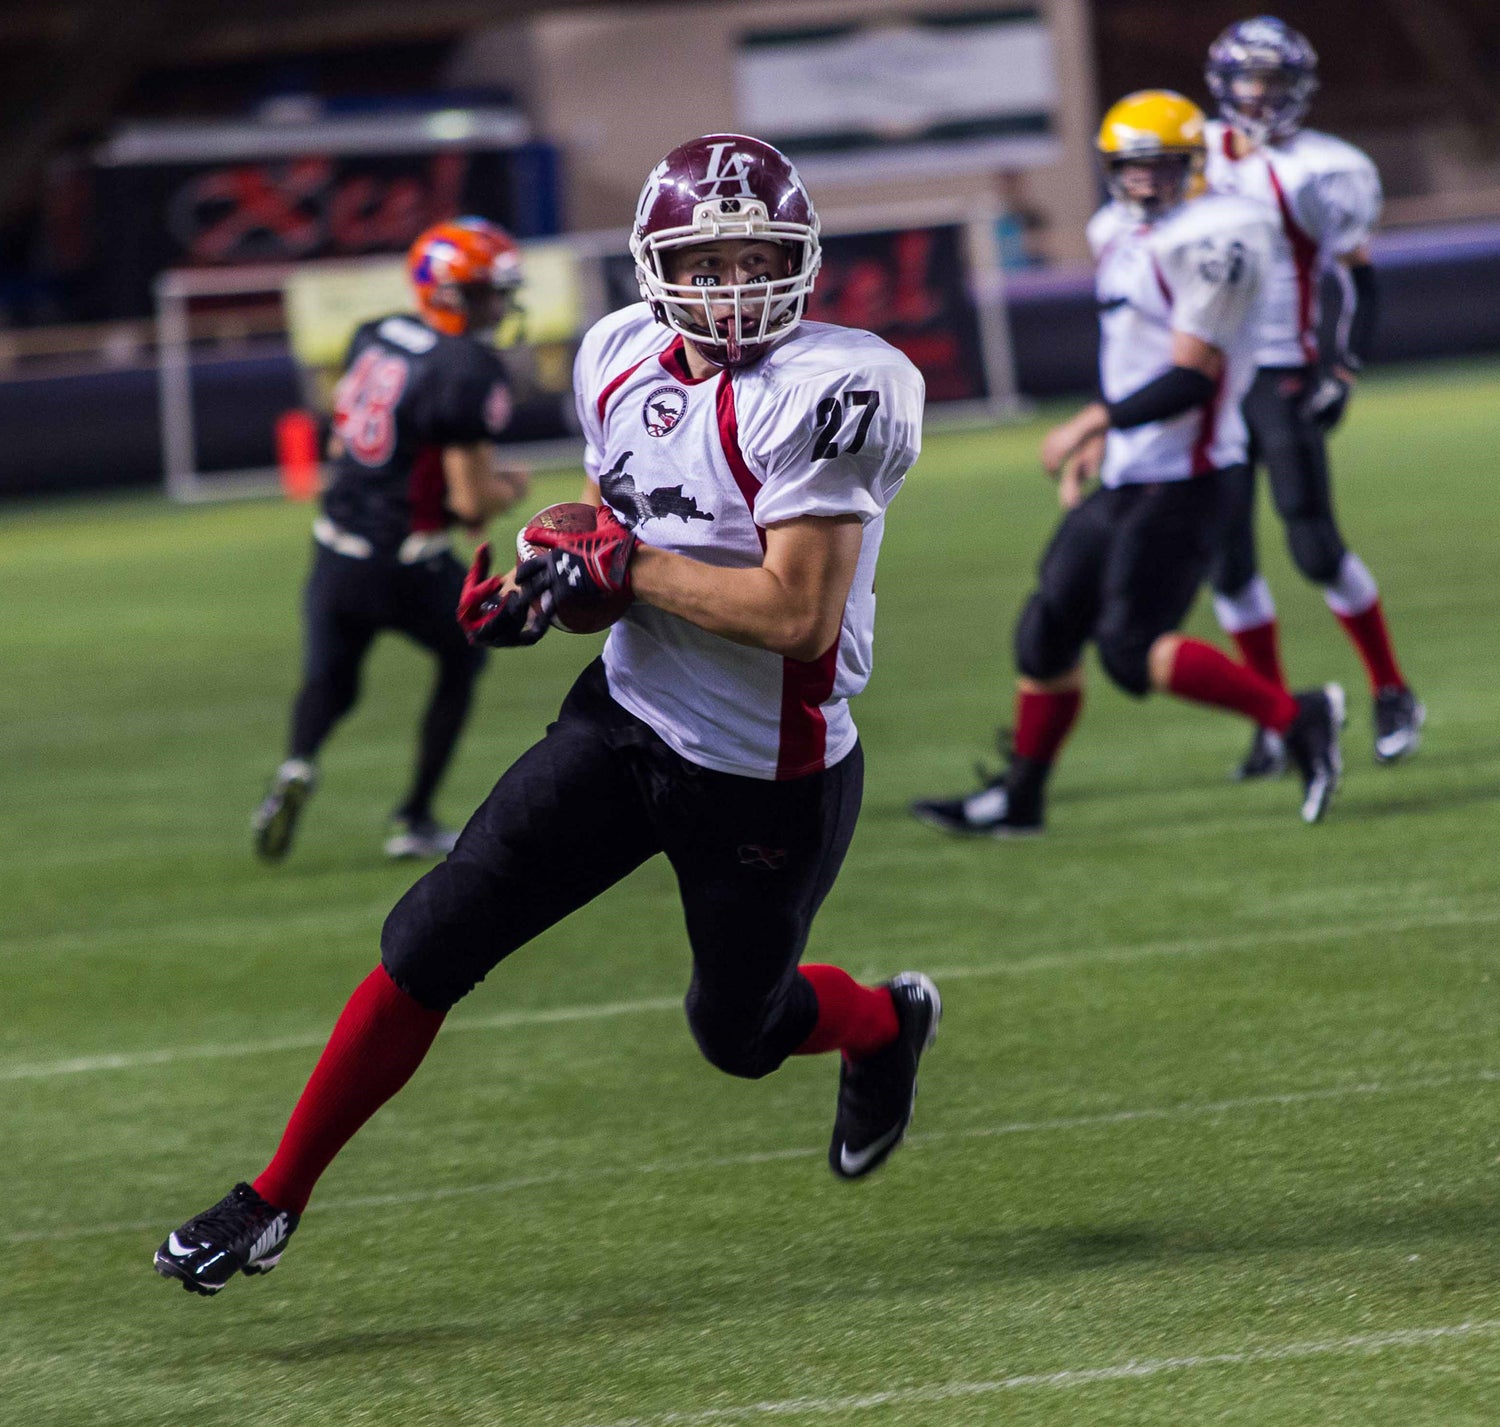 football player running with the ball for a touchdown